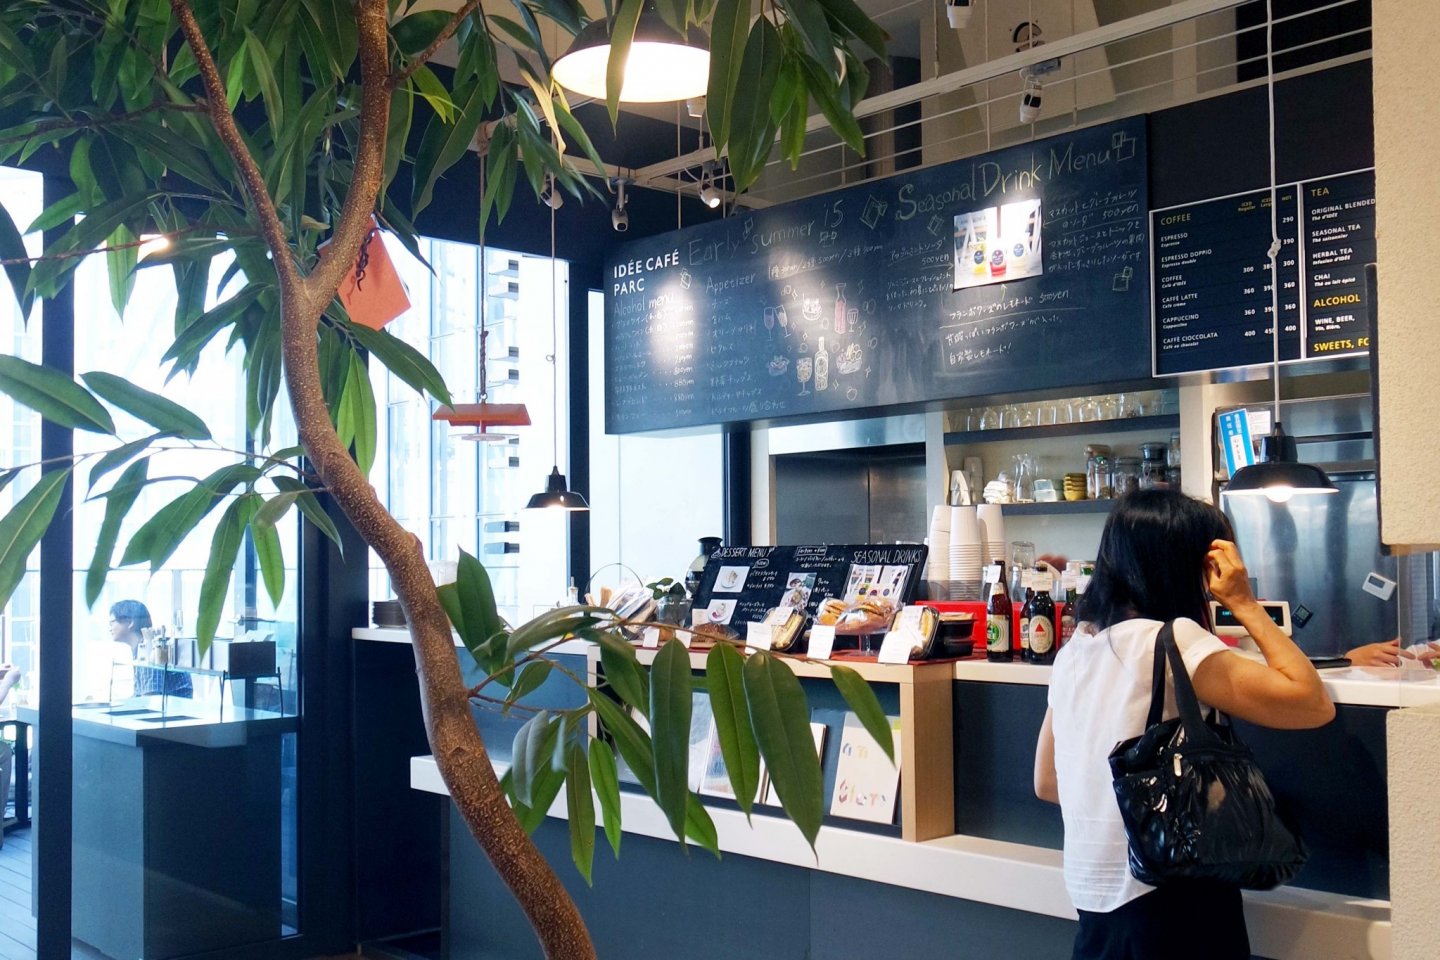 Idée Café Parc, which is located in the back of the Idée, is not be missed! 